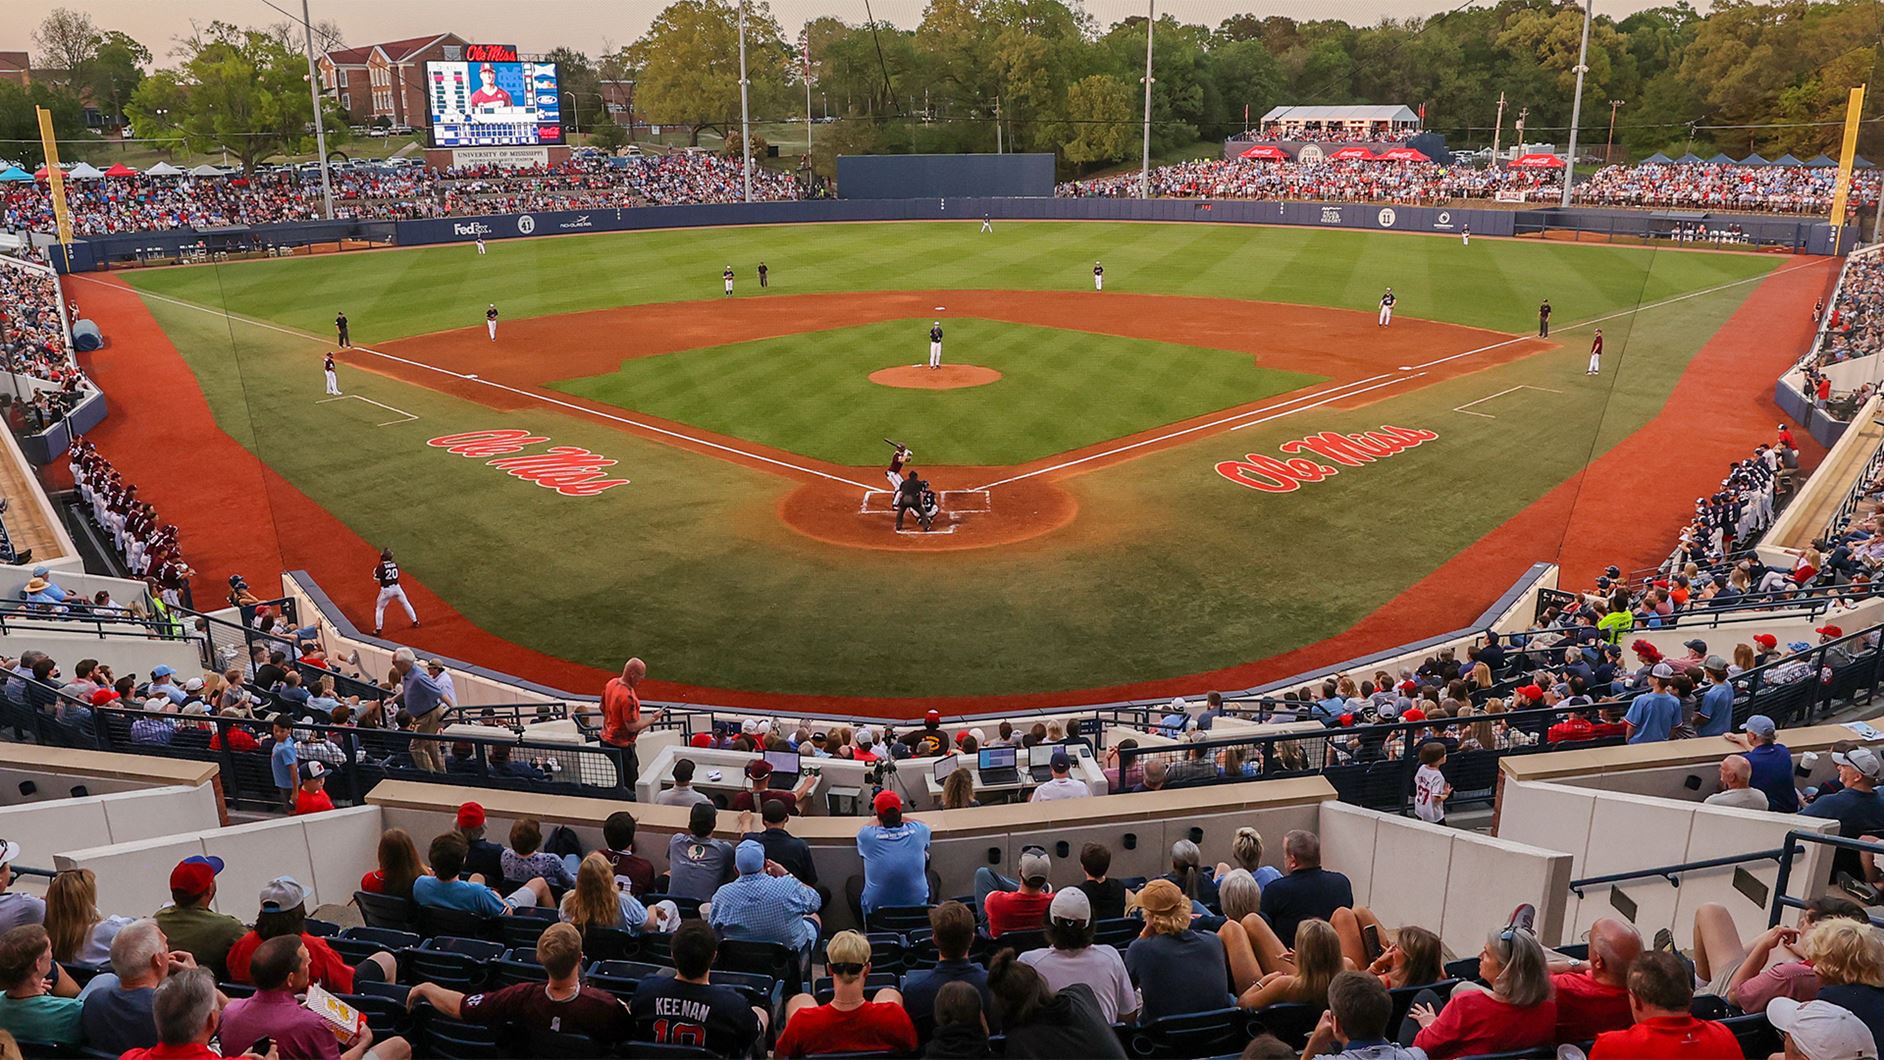 Super Regional watch party to be held at Swayze Field The Oxford